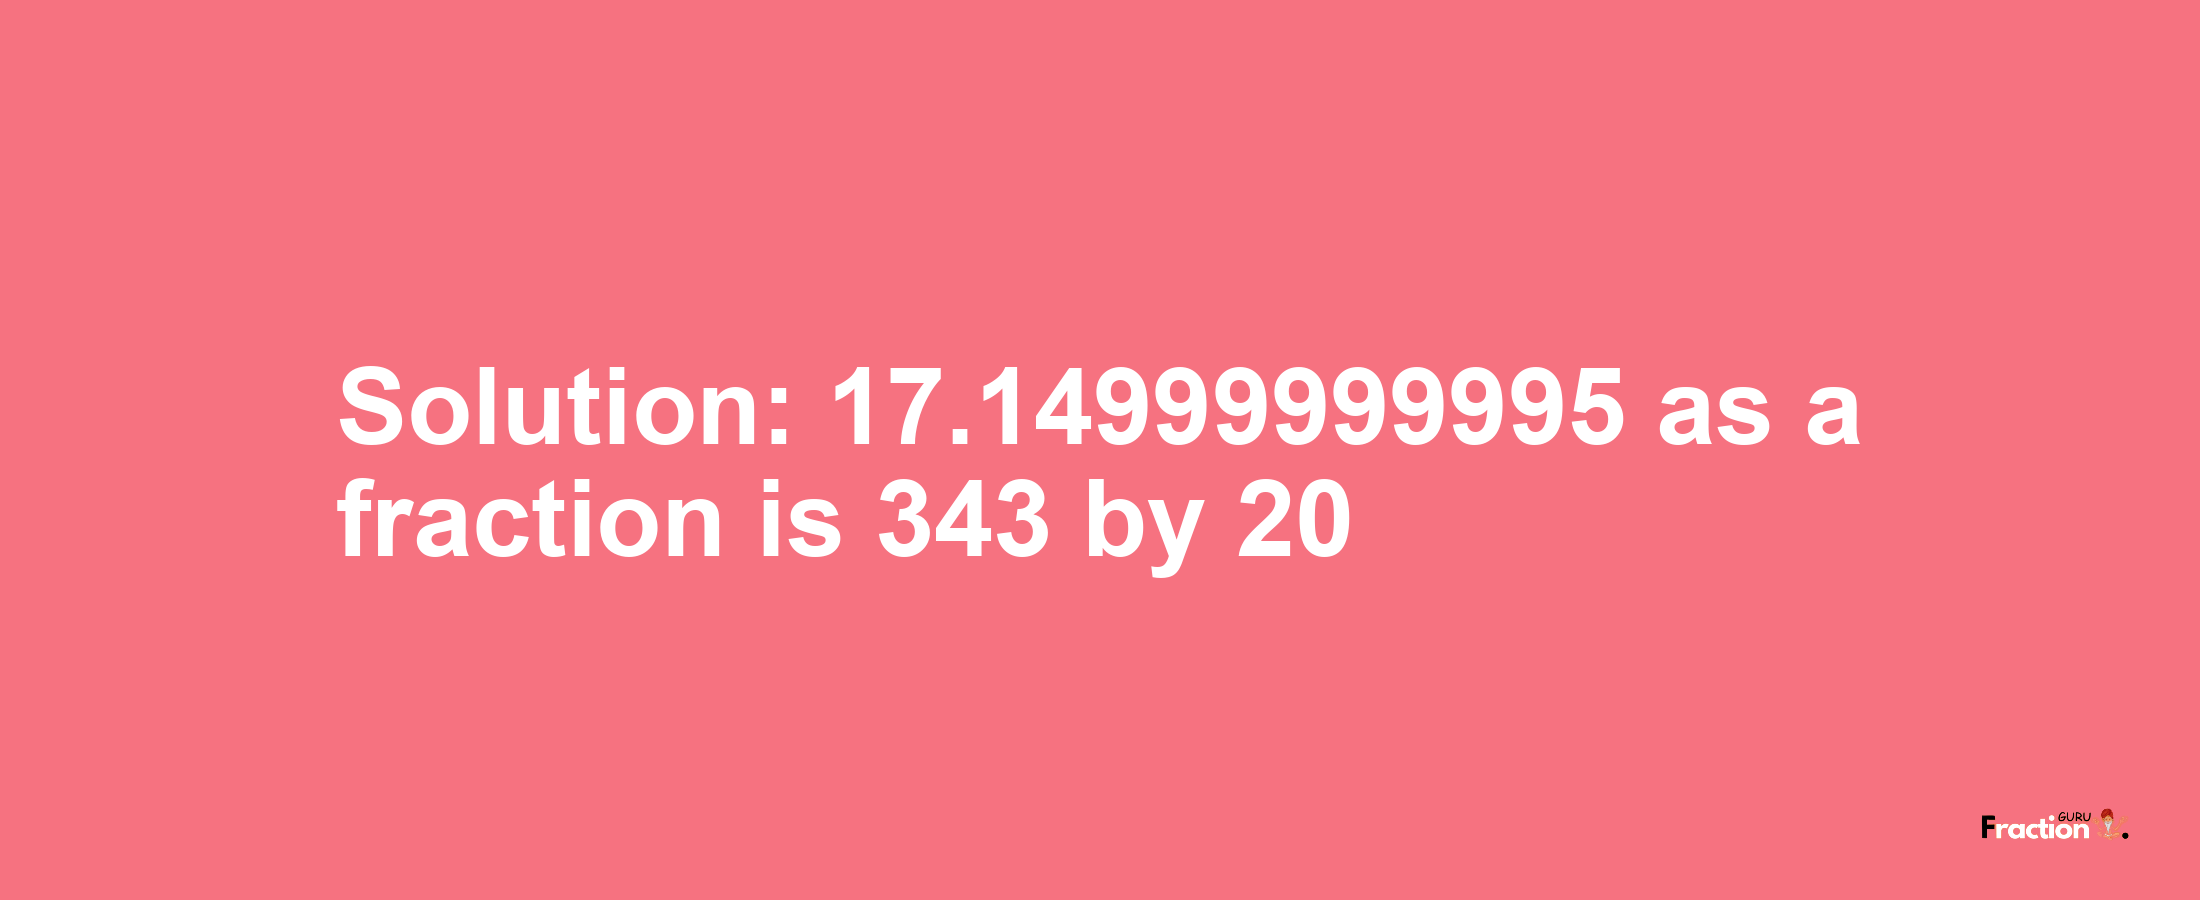 Solution:17.14999999995 as a fraction is 343/20